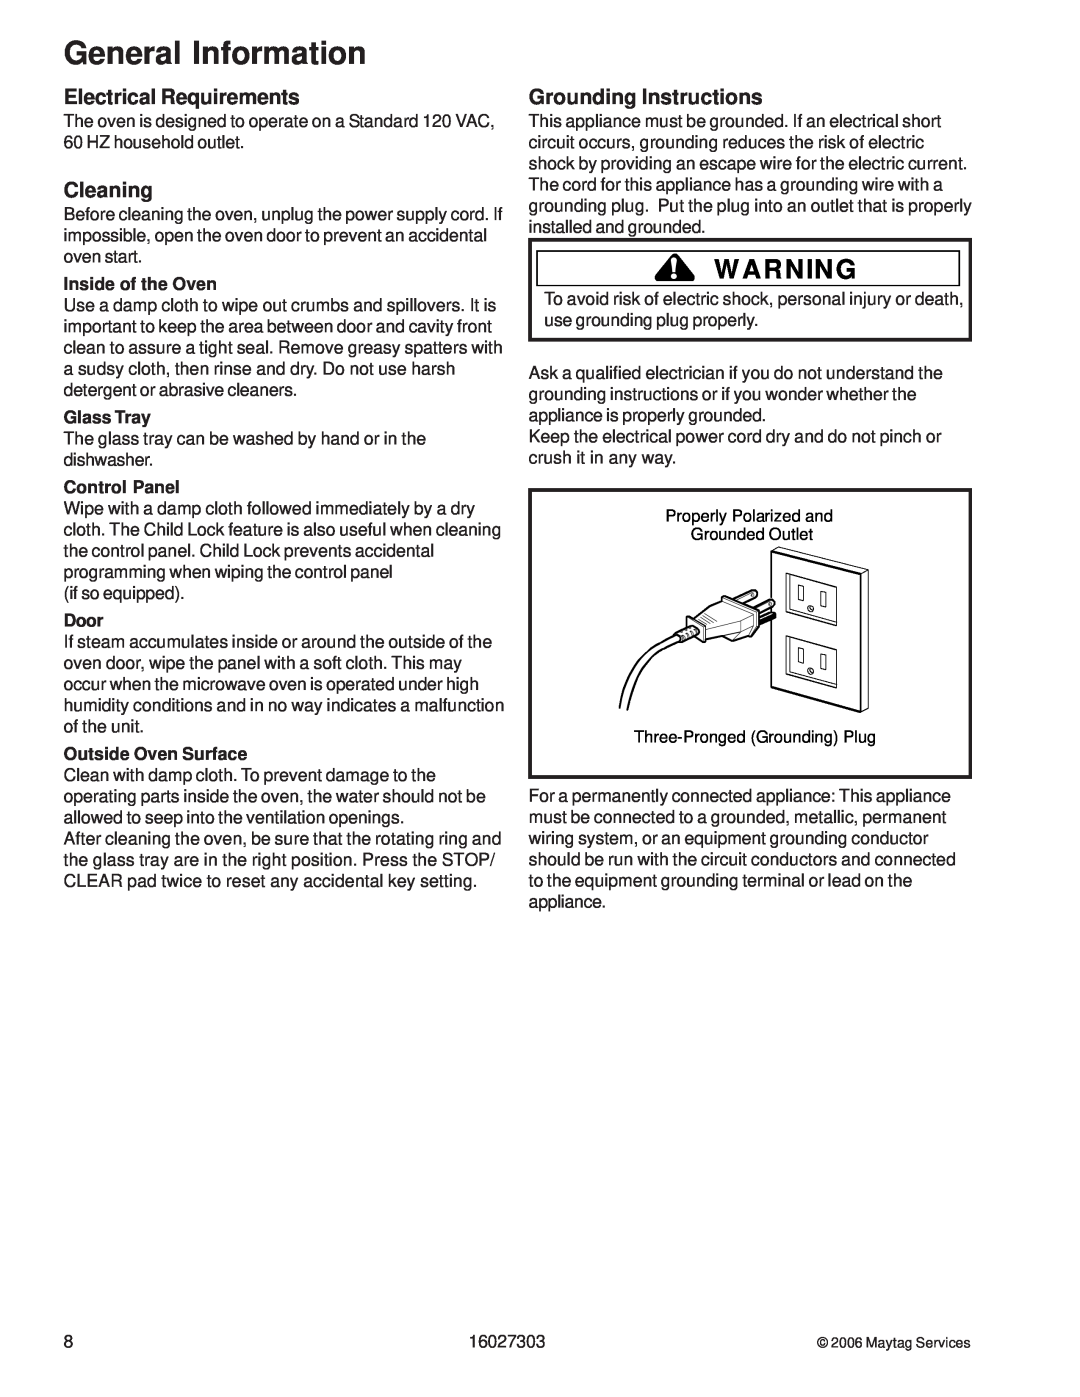 Maytag UMV1152CA Electrical Requirements, Cleaning, Grounding Instructions, General Information, Inside of the Oven, Door 